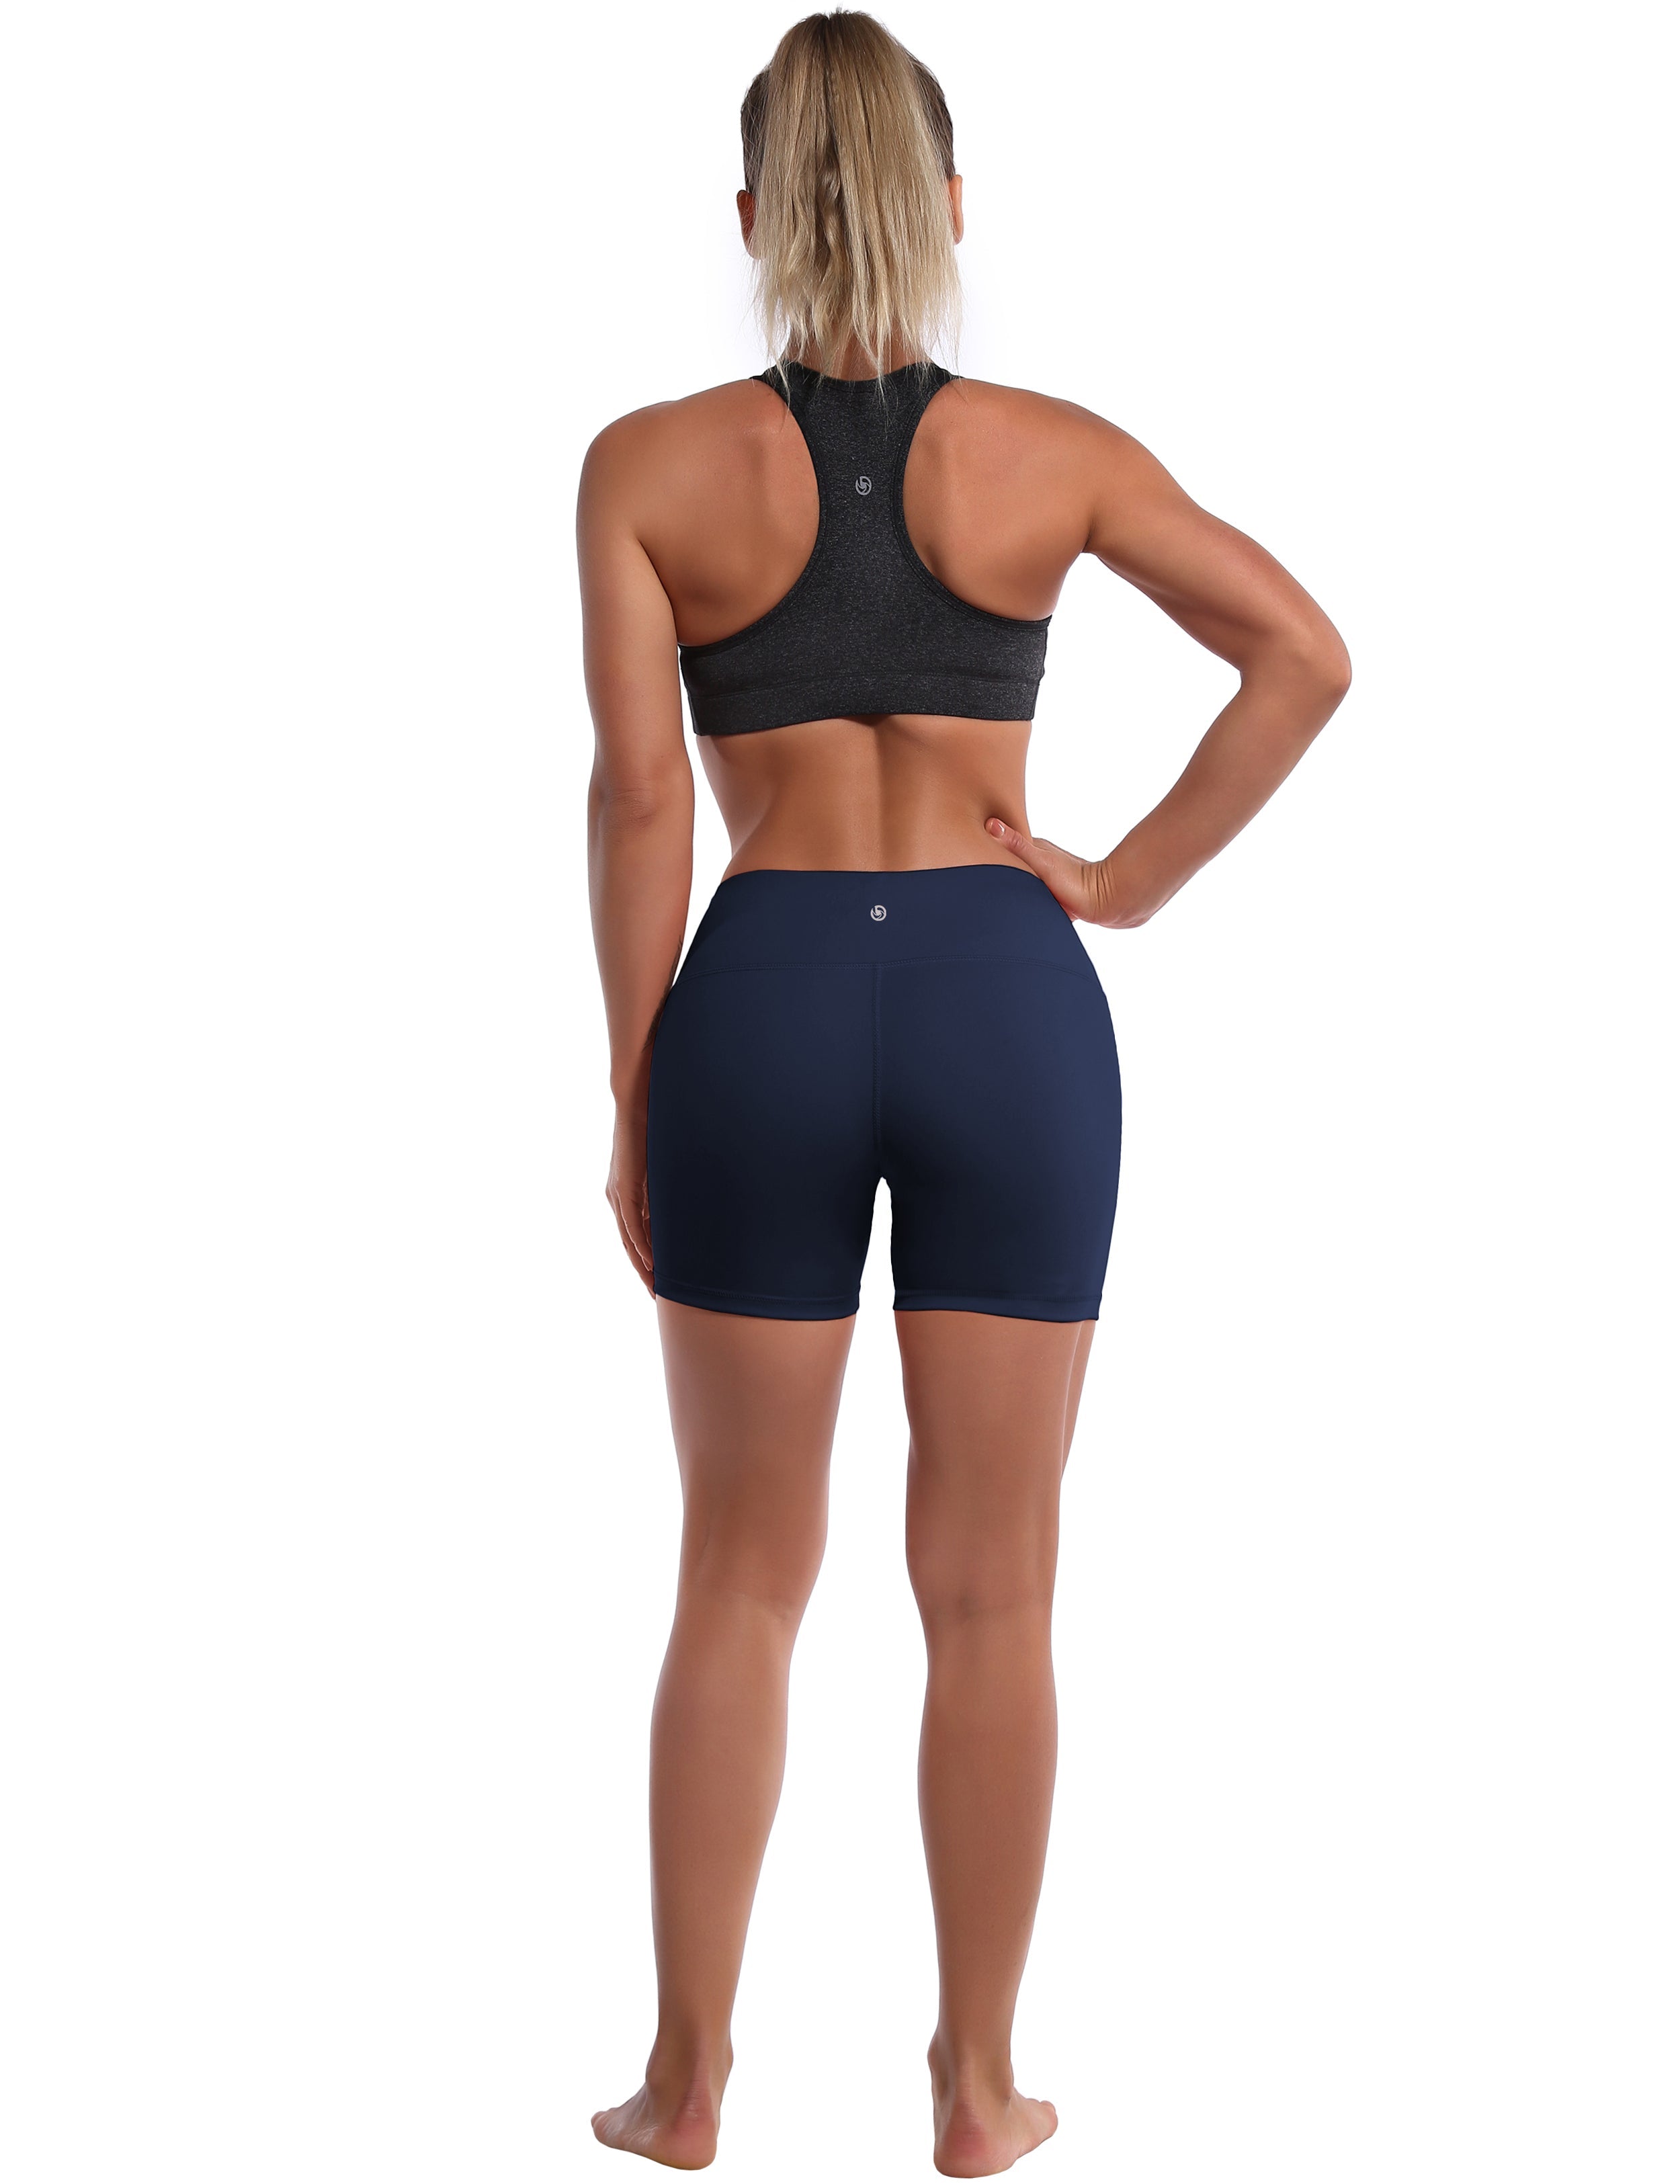 4" Golf Shorts darknavy Sleek, soft, smooth and totally comfortable: our newest style is here. Softest-ever fabric High elasticity High density 4-way stretch Fabric doesn't attract lint easily No see-through Moisture-wicking Machine wash 75% Nylon, 25% Spandex